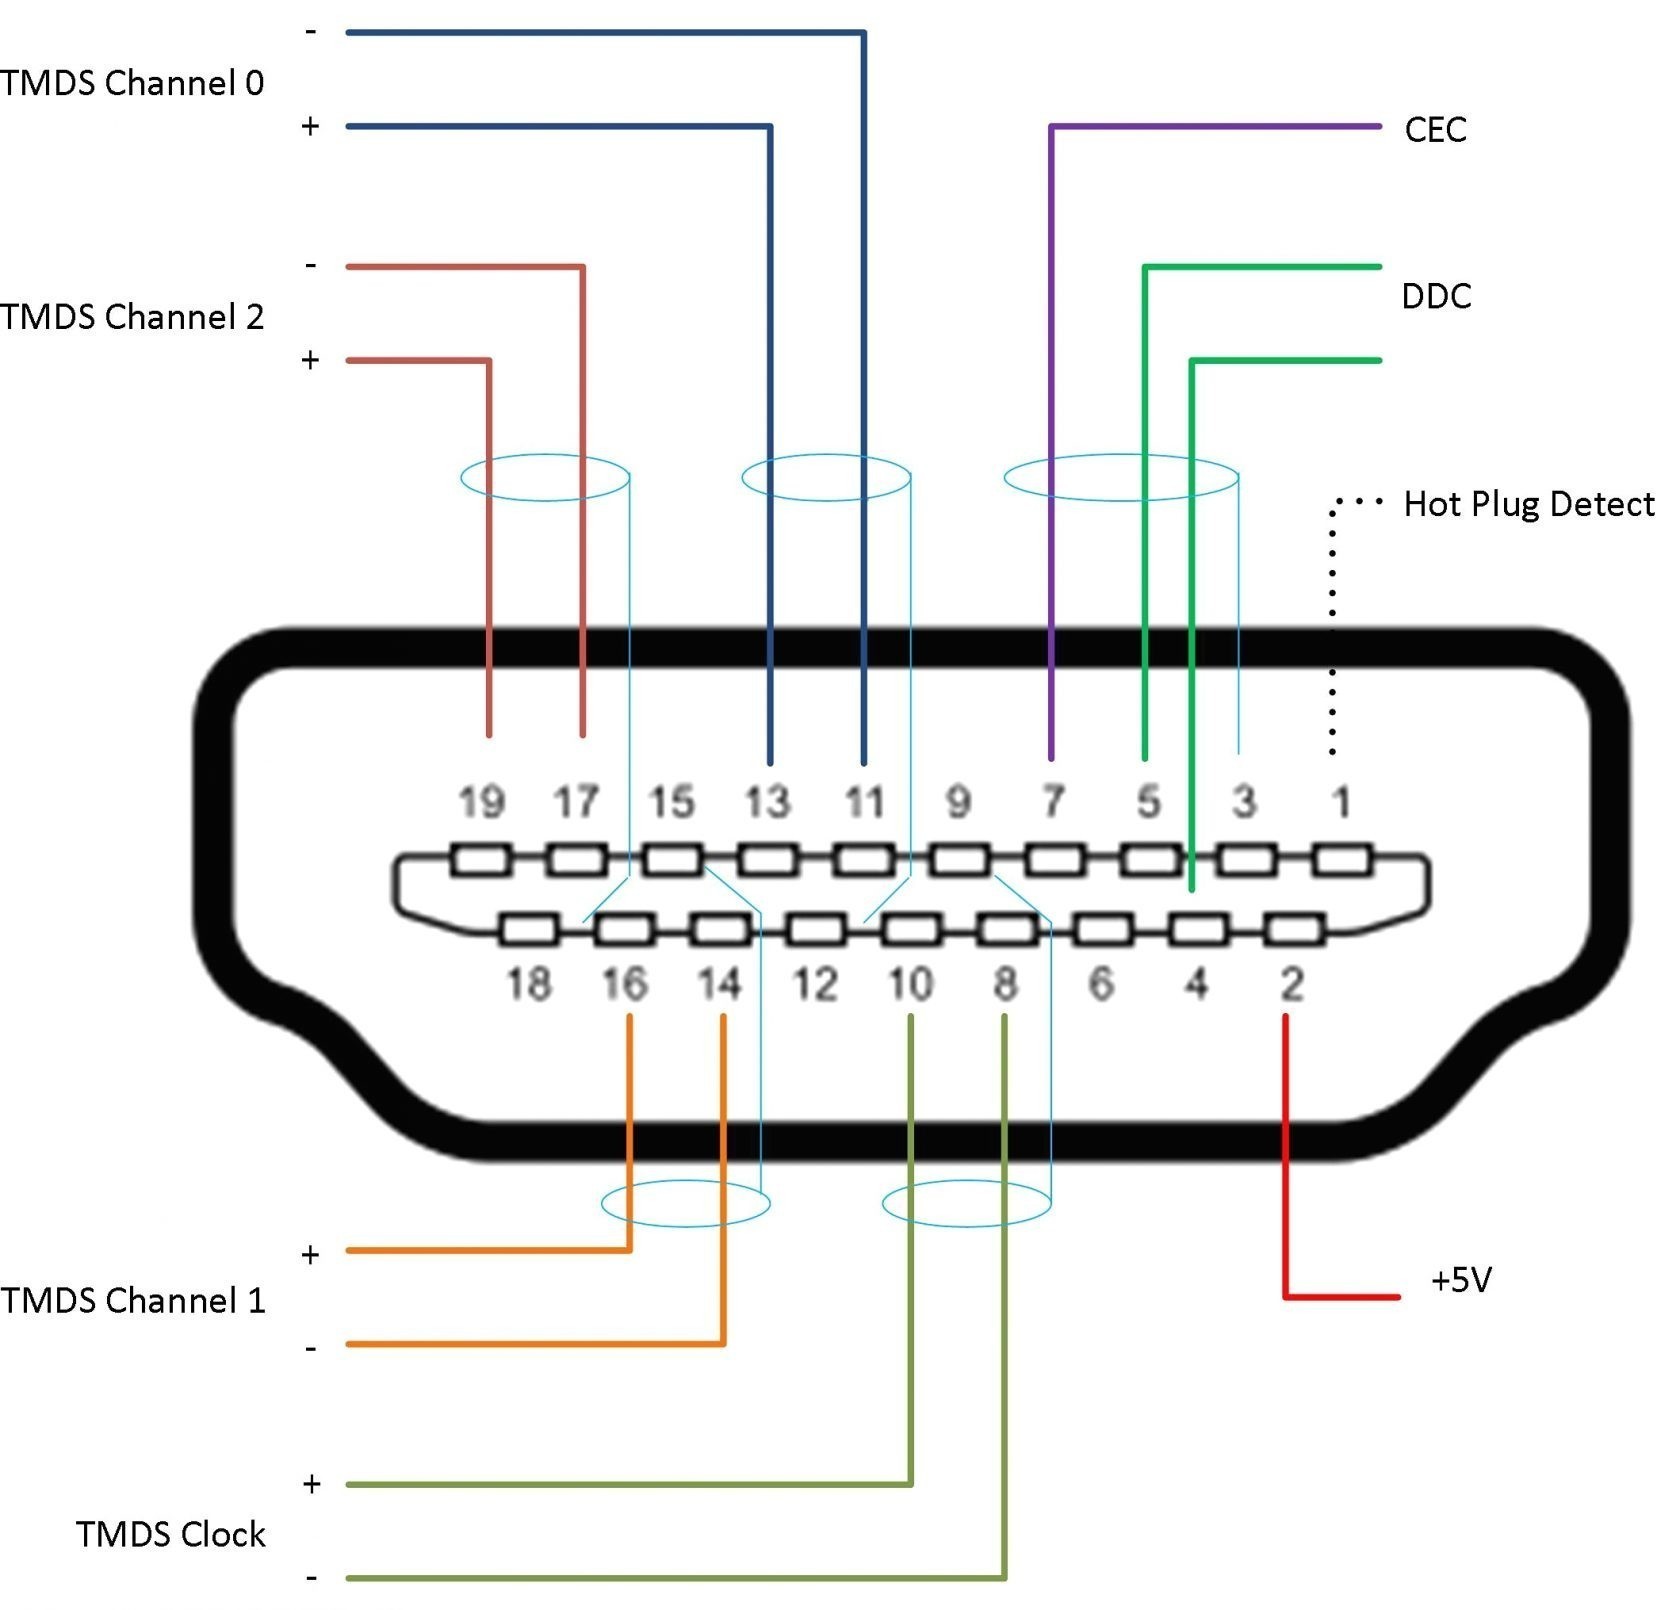 Wiring Diagram Vga to Hdmi New Great Hdmi to Rca Cable Wiring Diagram Gallery Electrical and